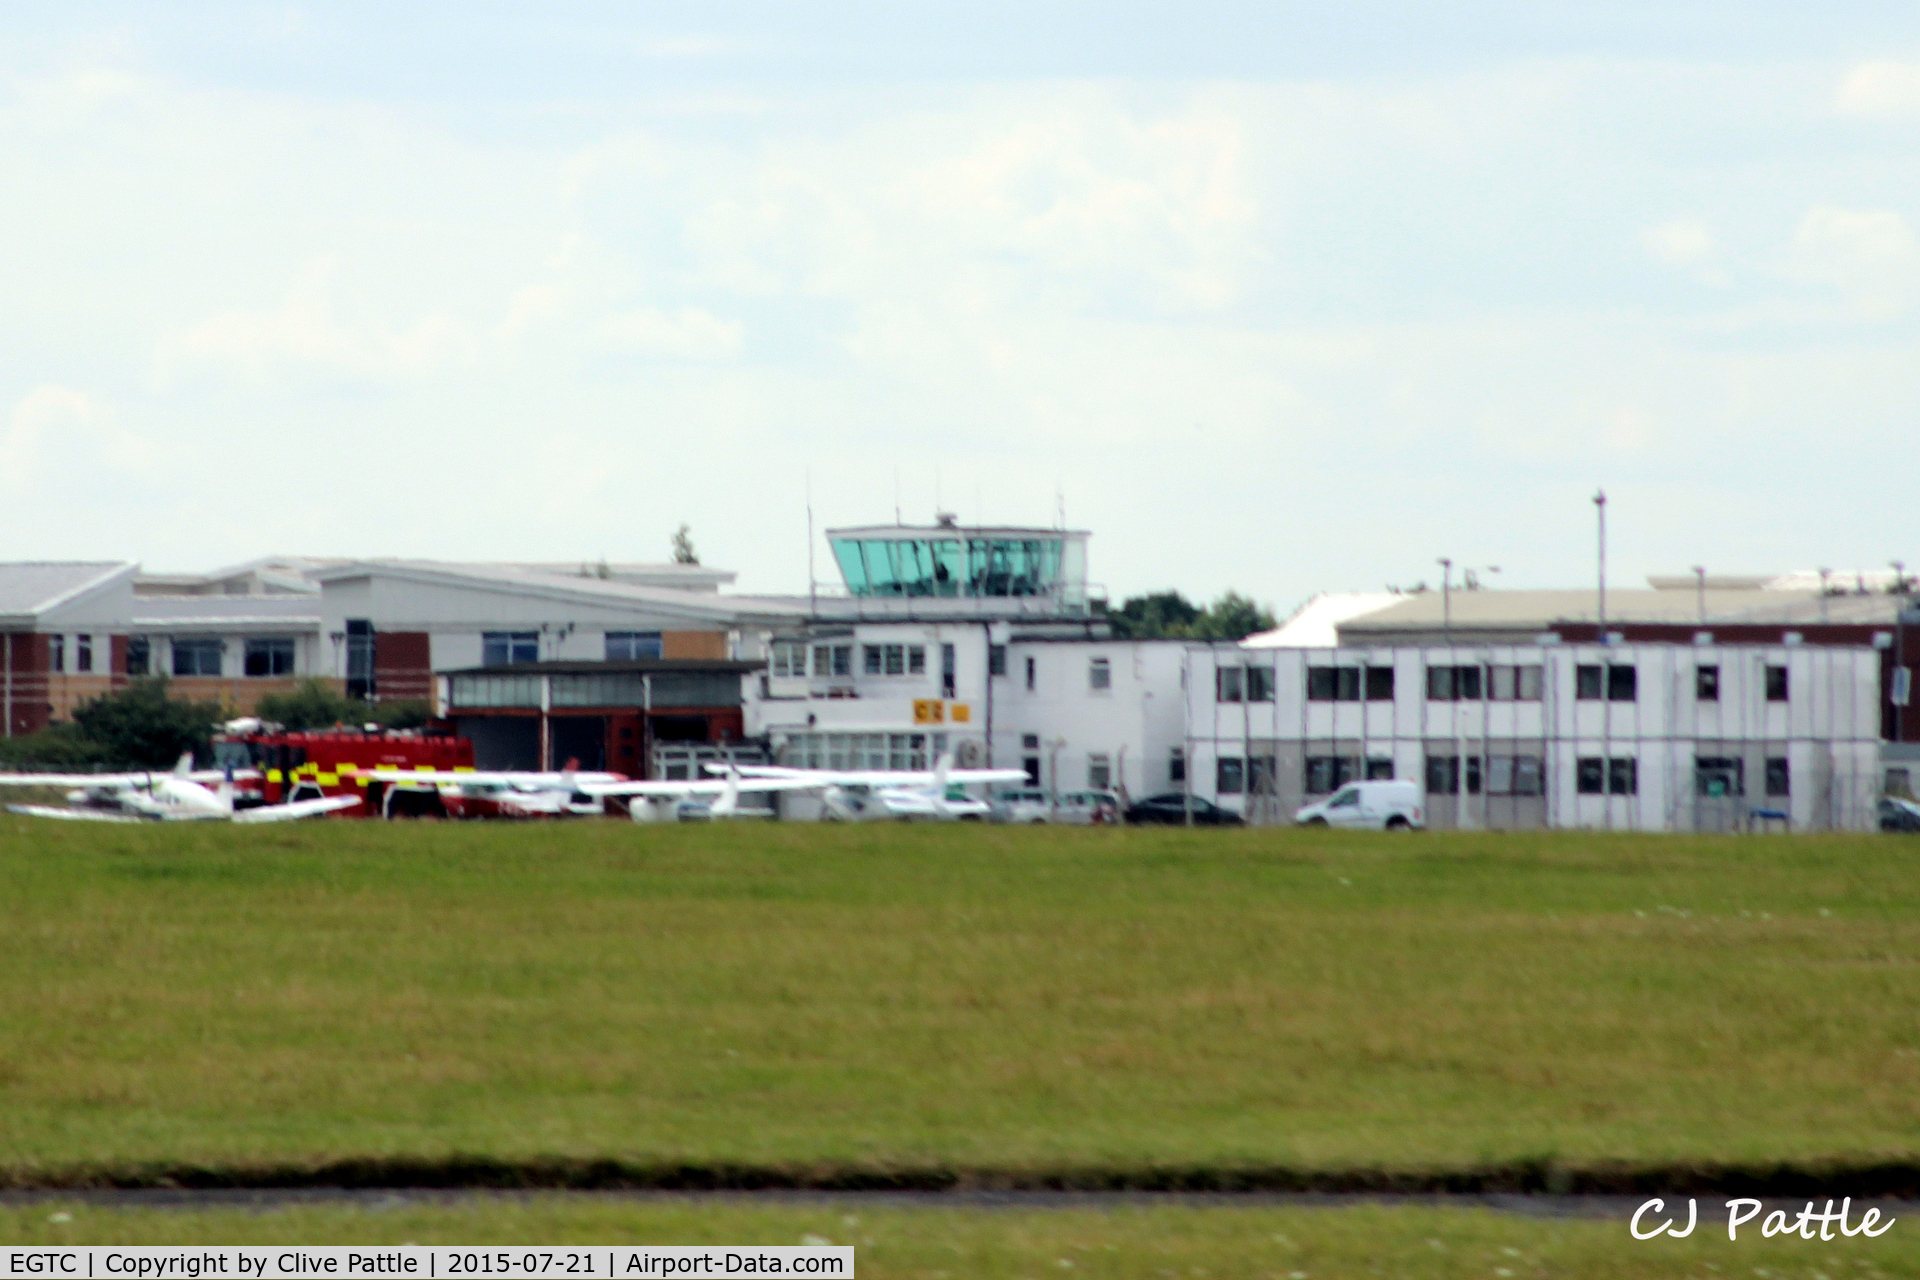 Cranfield Airport, Cranfield, England United Kingdom (EGTC) - The tower and other airport buildings at Cranfield EGTC, Bedfordshire, UK viewed from the runway